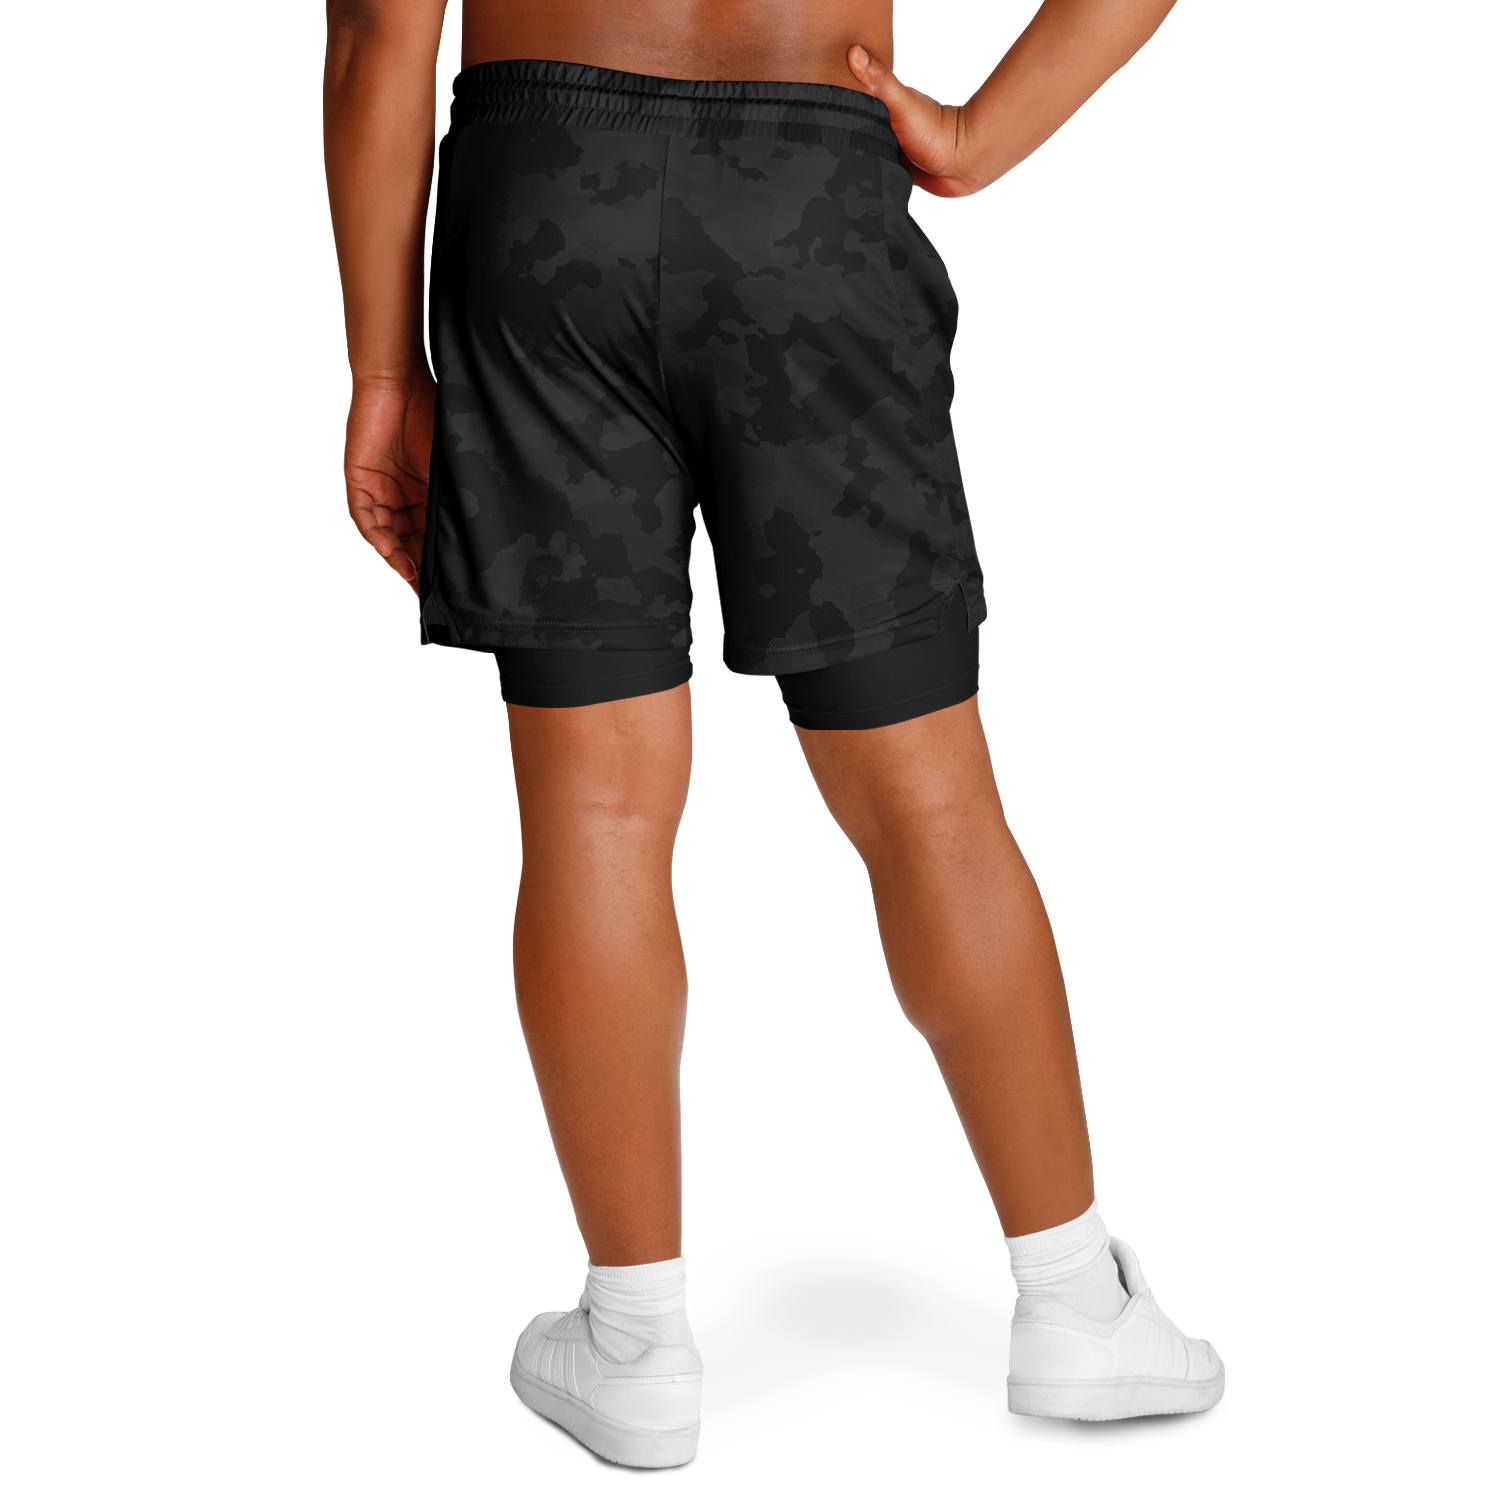 THE DISCIPLINE 2 IN 1 MENS SHORTS